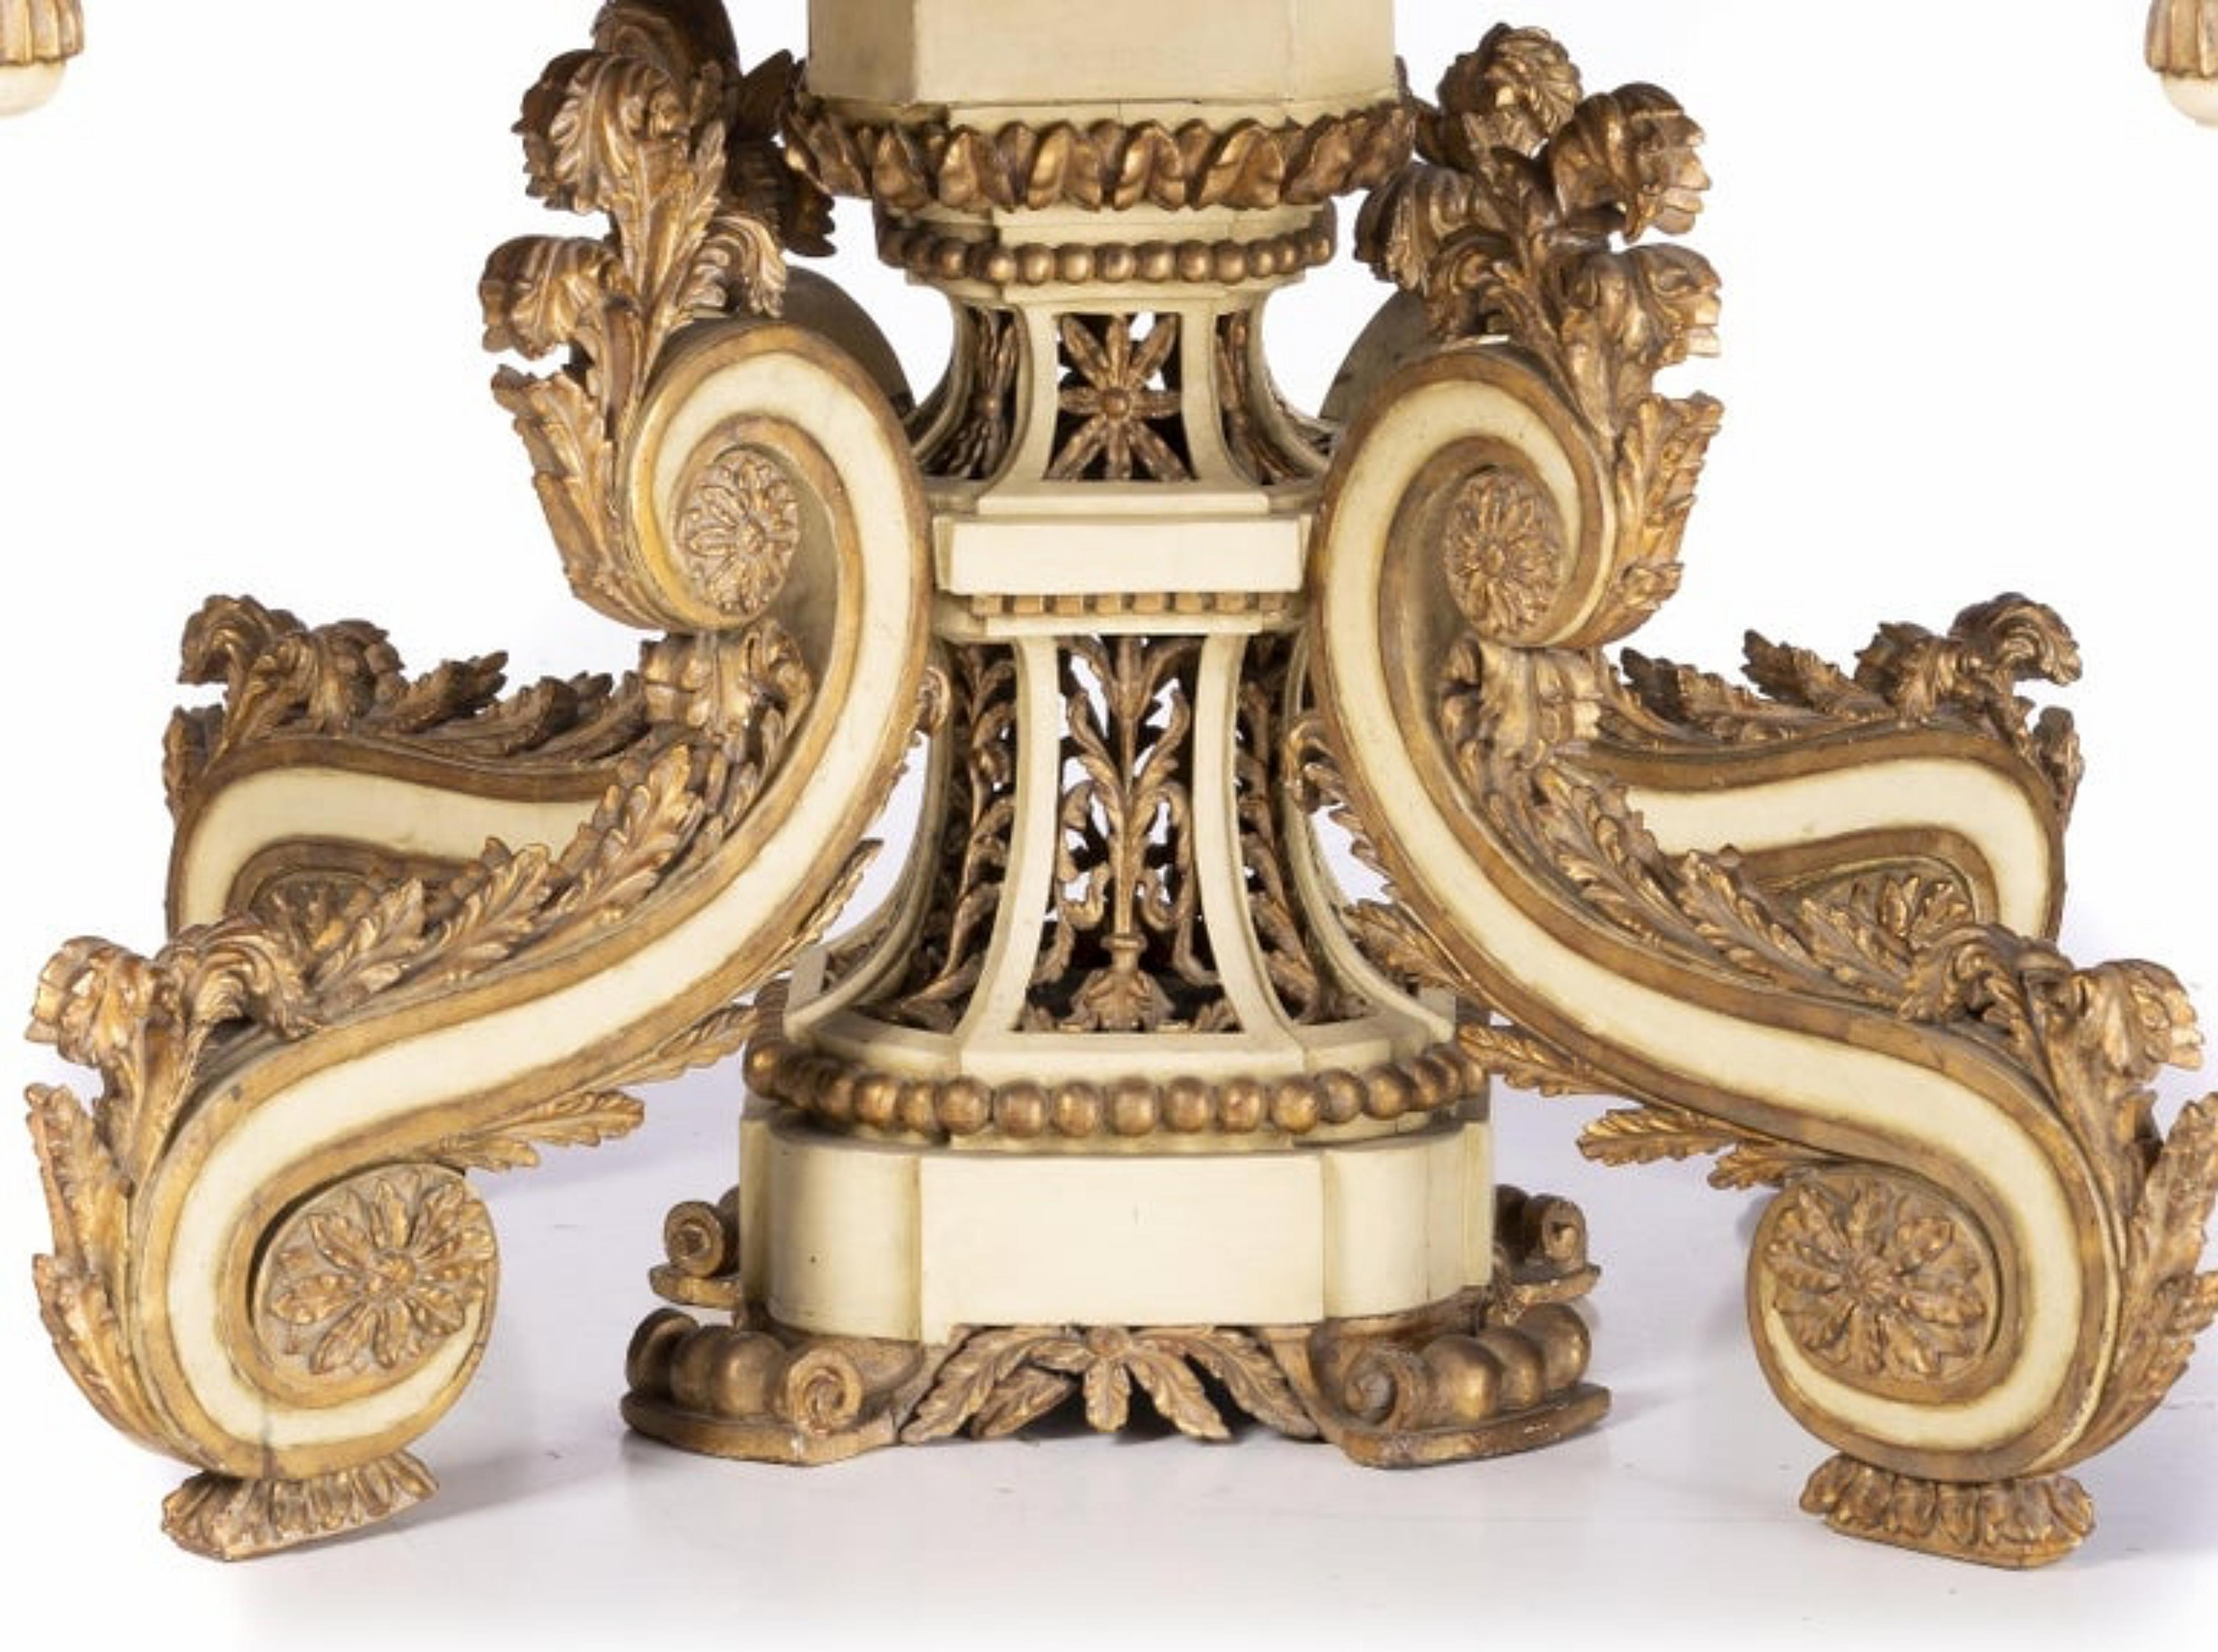 Portuguese Apparatus table

18th century
In painted wood with gilt carvings, central column profusely carved and pierced, resting on four curved feet. Small defects.
Dimensions: 90 x 110 x 120 cm
Very good conditions.